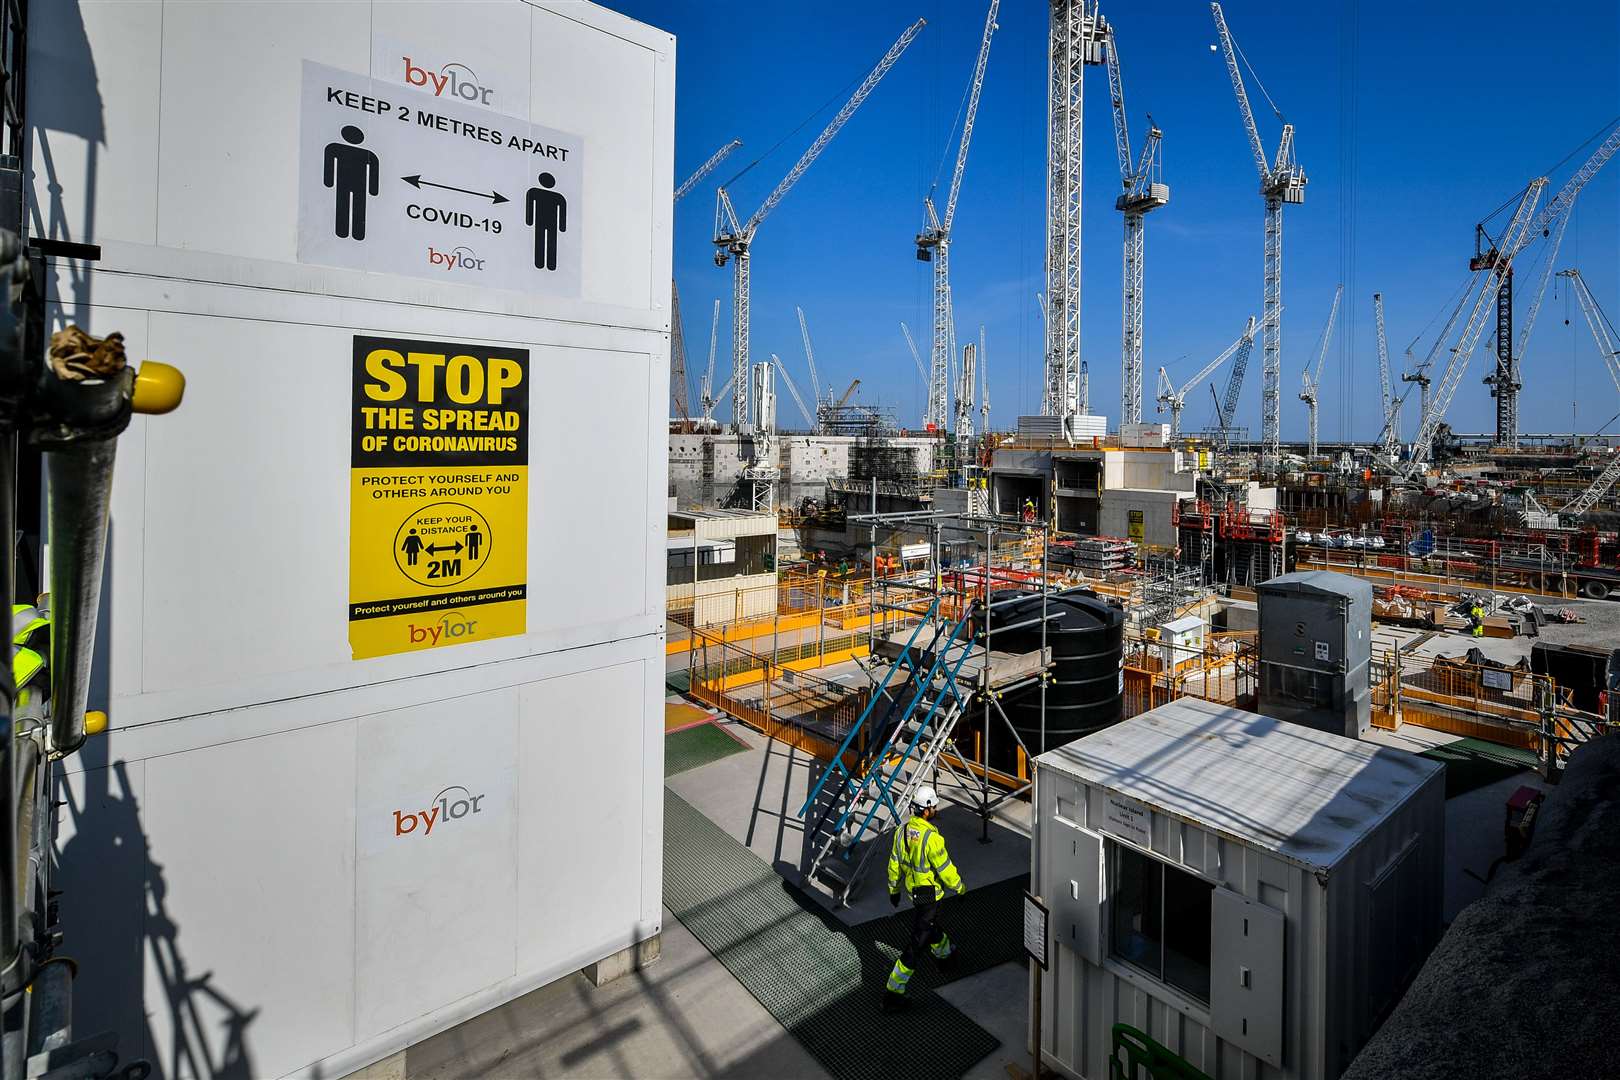 The project has continued despite the Covid-19 pandemic leading to social distancing restrictions on the site (Ben Birchall/PA)